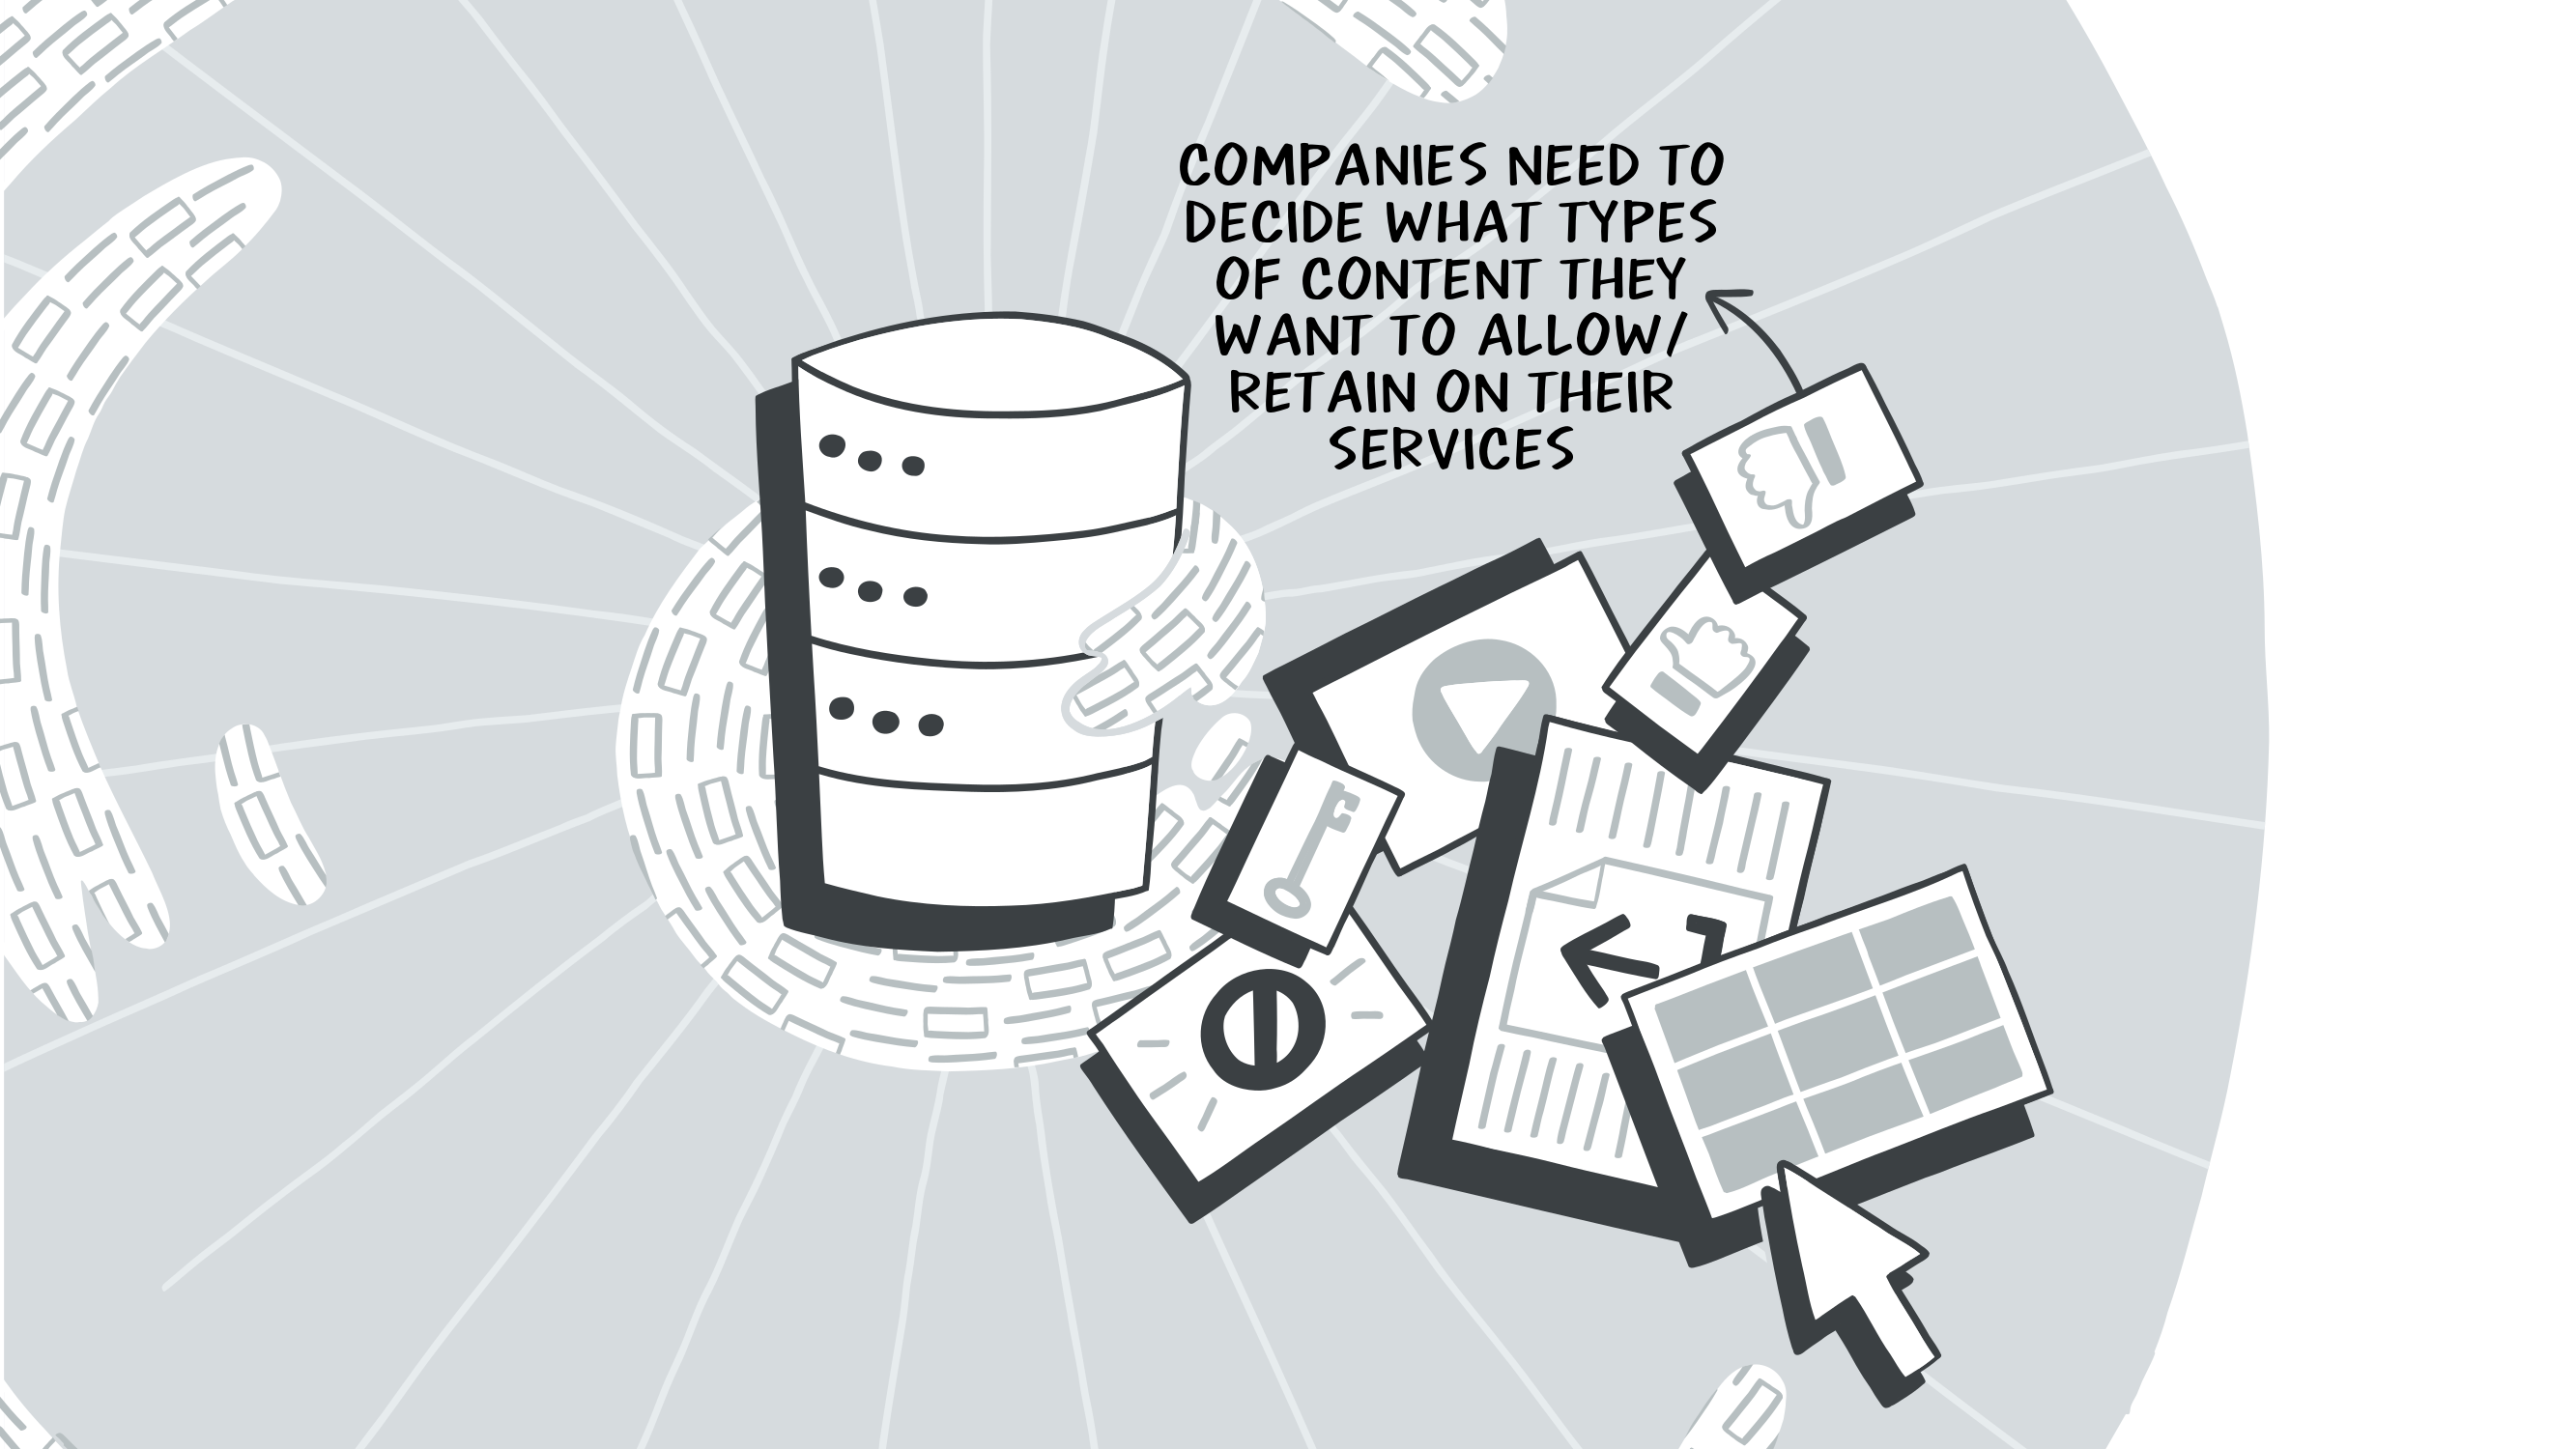 Companies need to decide what types of content they want to allow/retain on their services